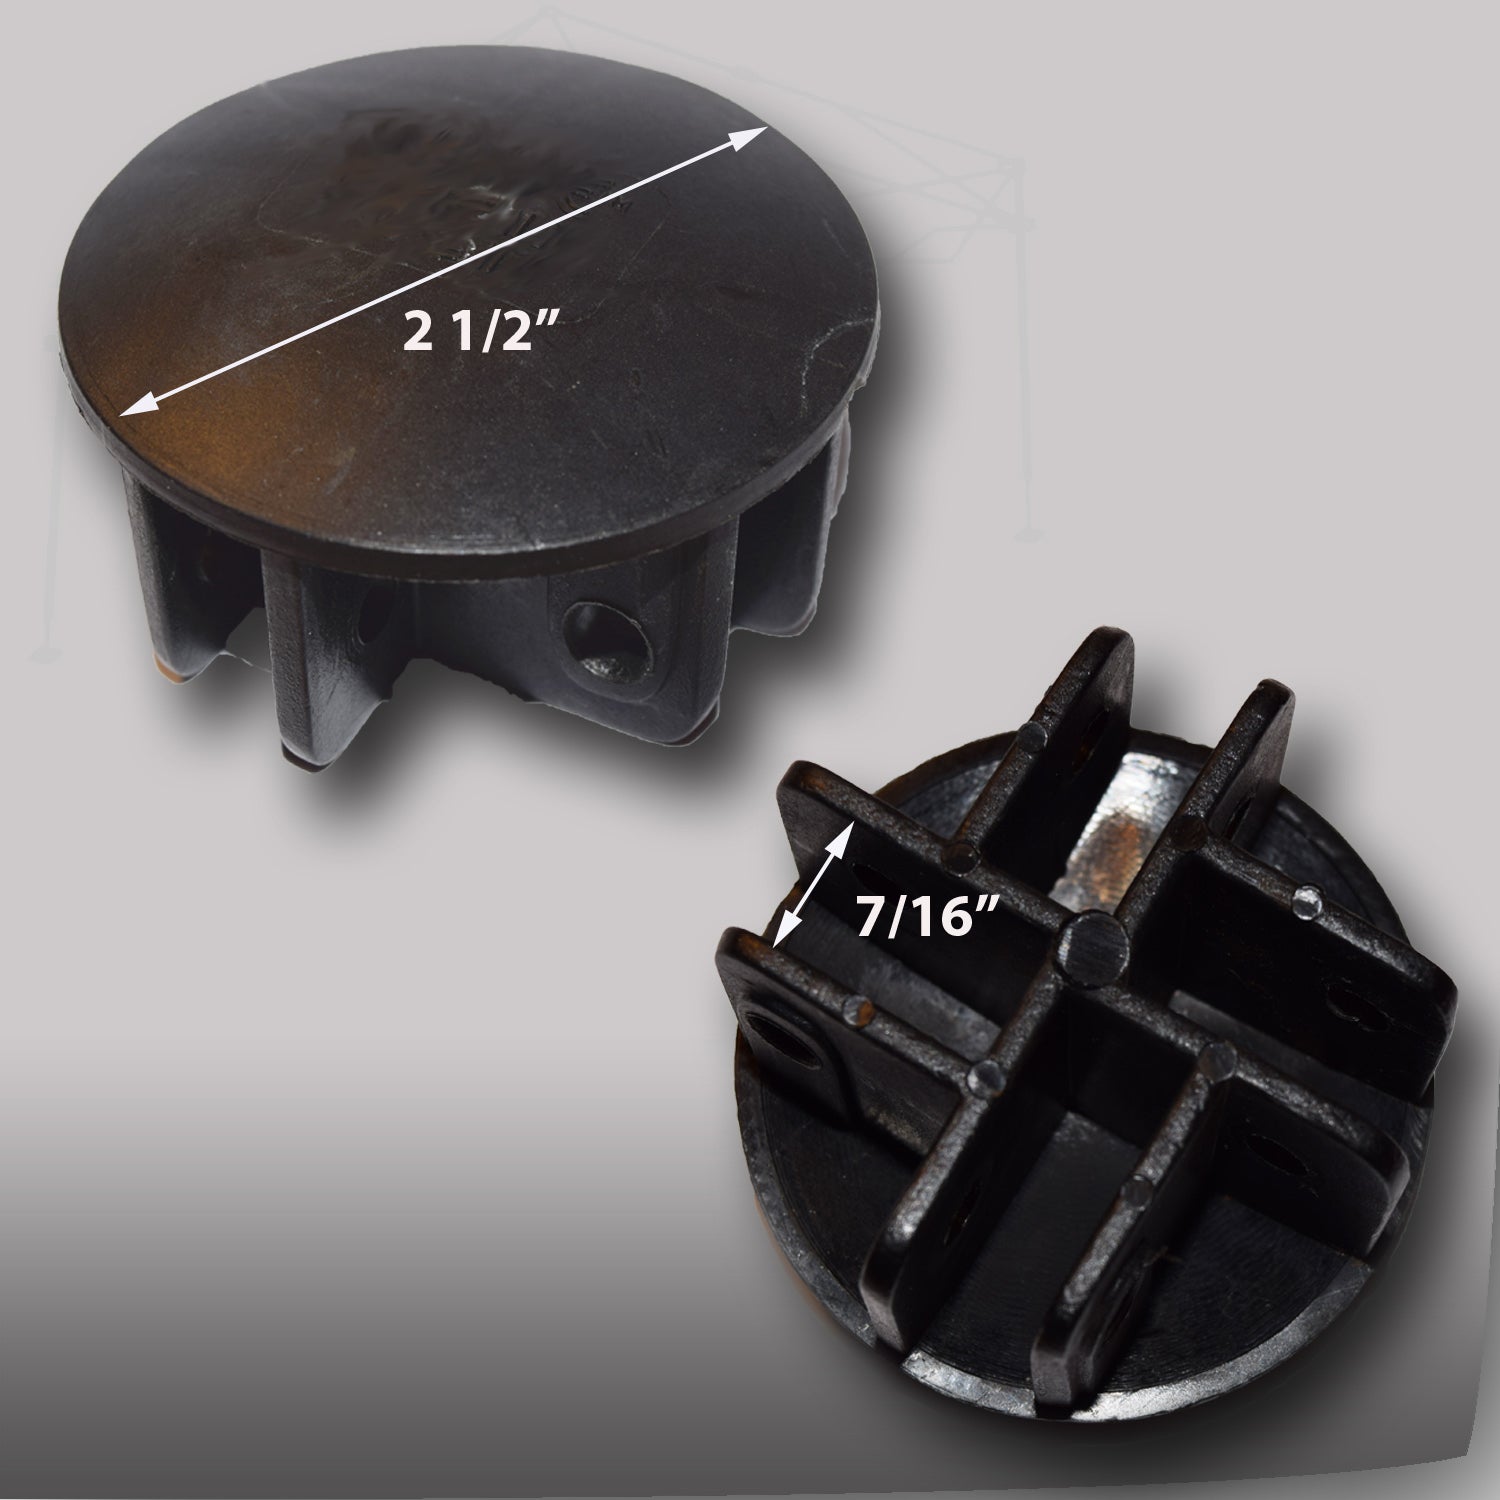 In this photo, you can see black HUB Connector Replacement Parts designed for the E-Z UP 10" x 10" Straight Leg Canopy. These replacement components are crucial for the assembly and stability of your canopy, guaranteeing a dependable and secure shelter during various outdoor events.